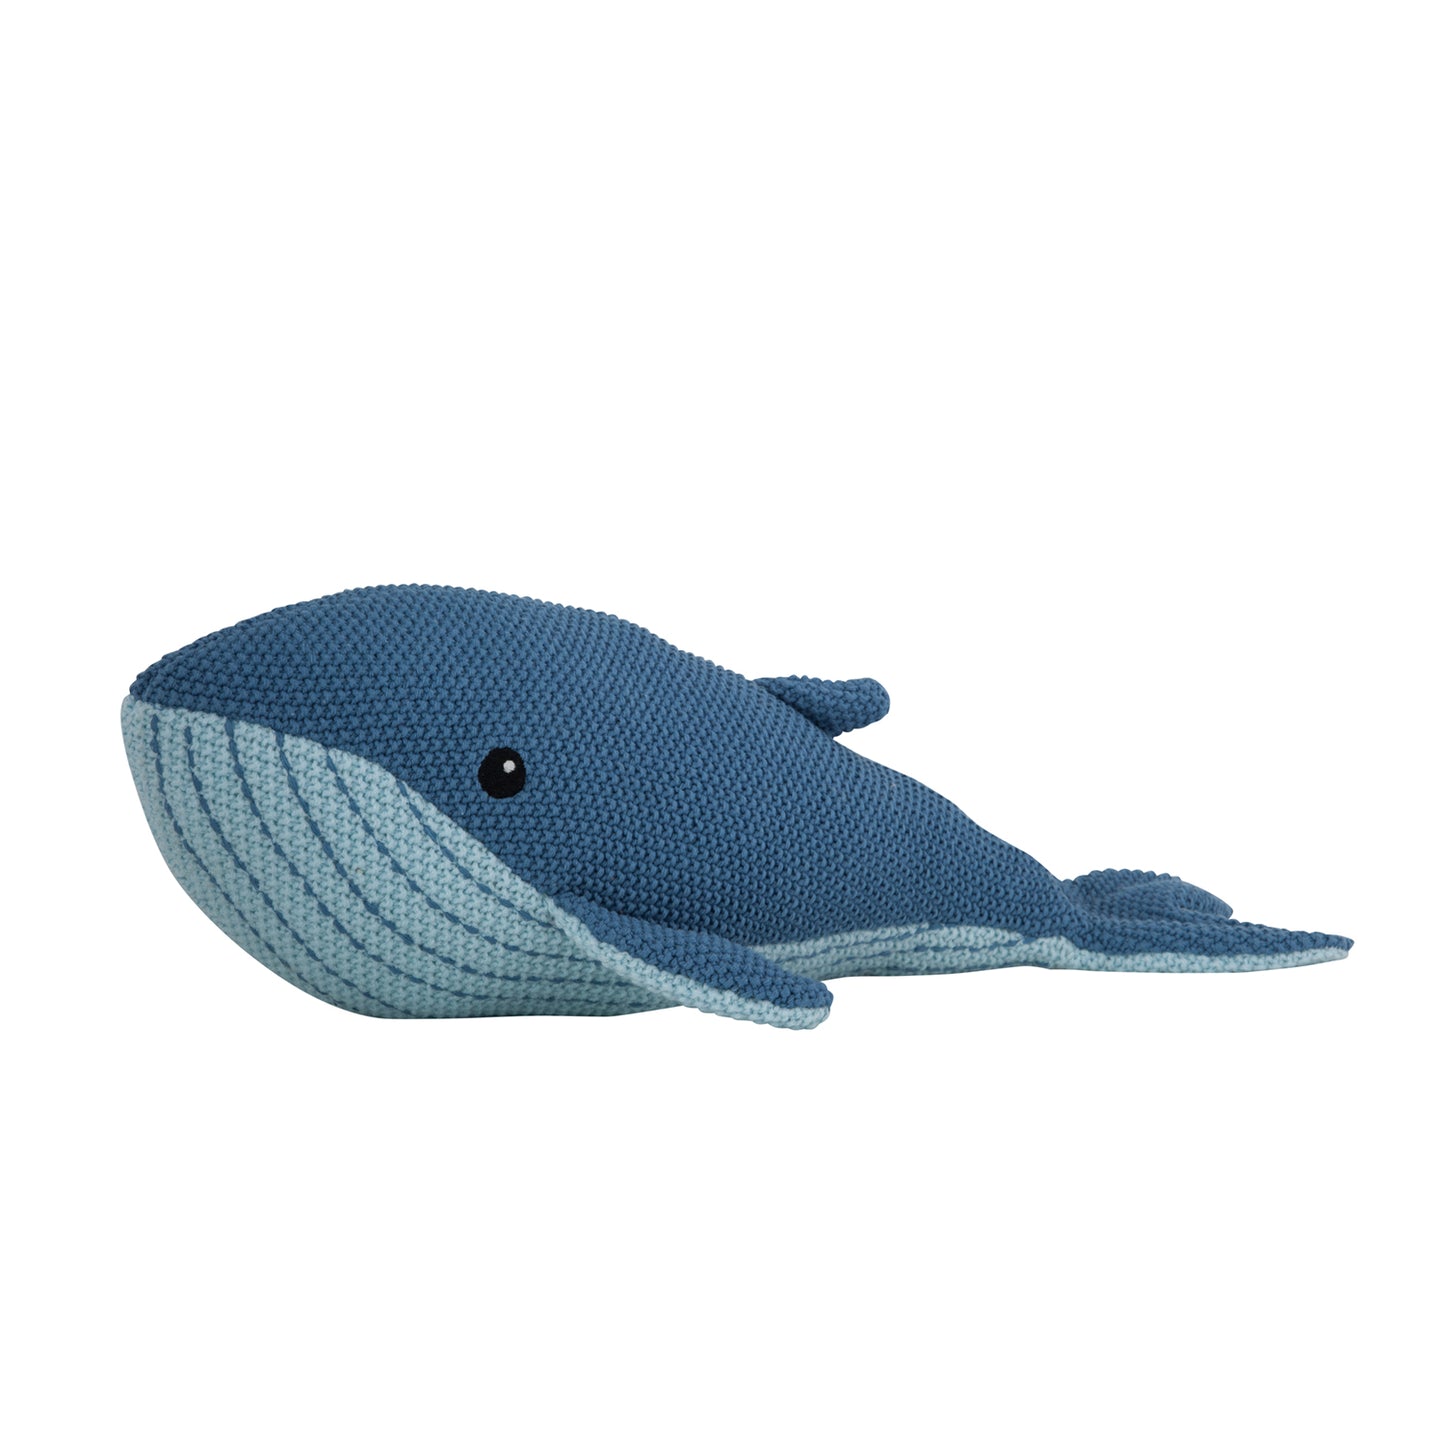 Walter the Whale Soft Toy